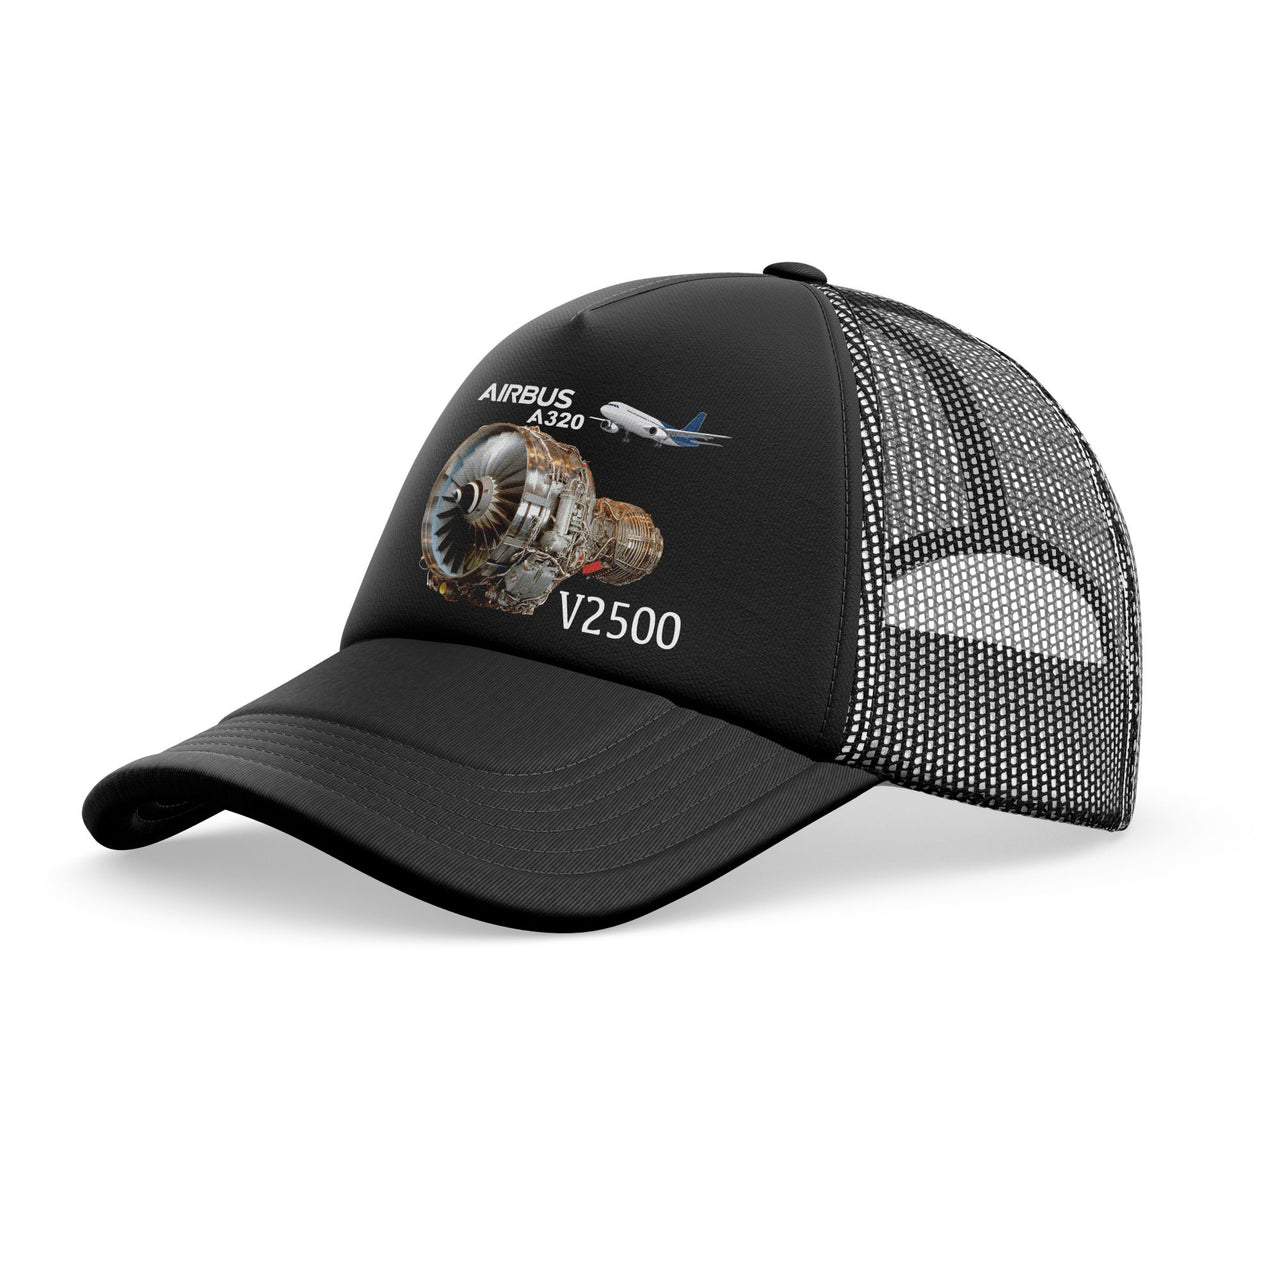 Airbus A320 & V2500 Engine Designed Trucker Caps & Hats